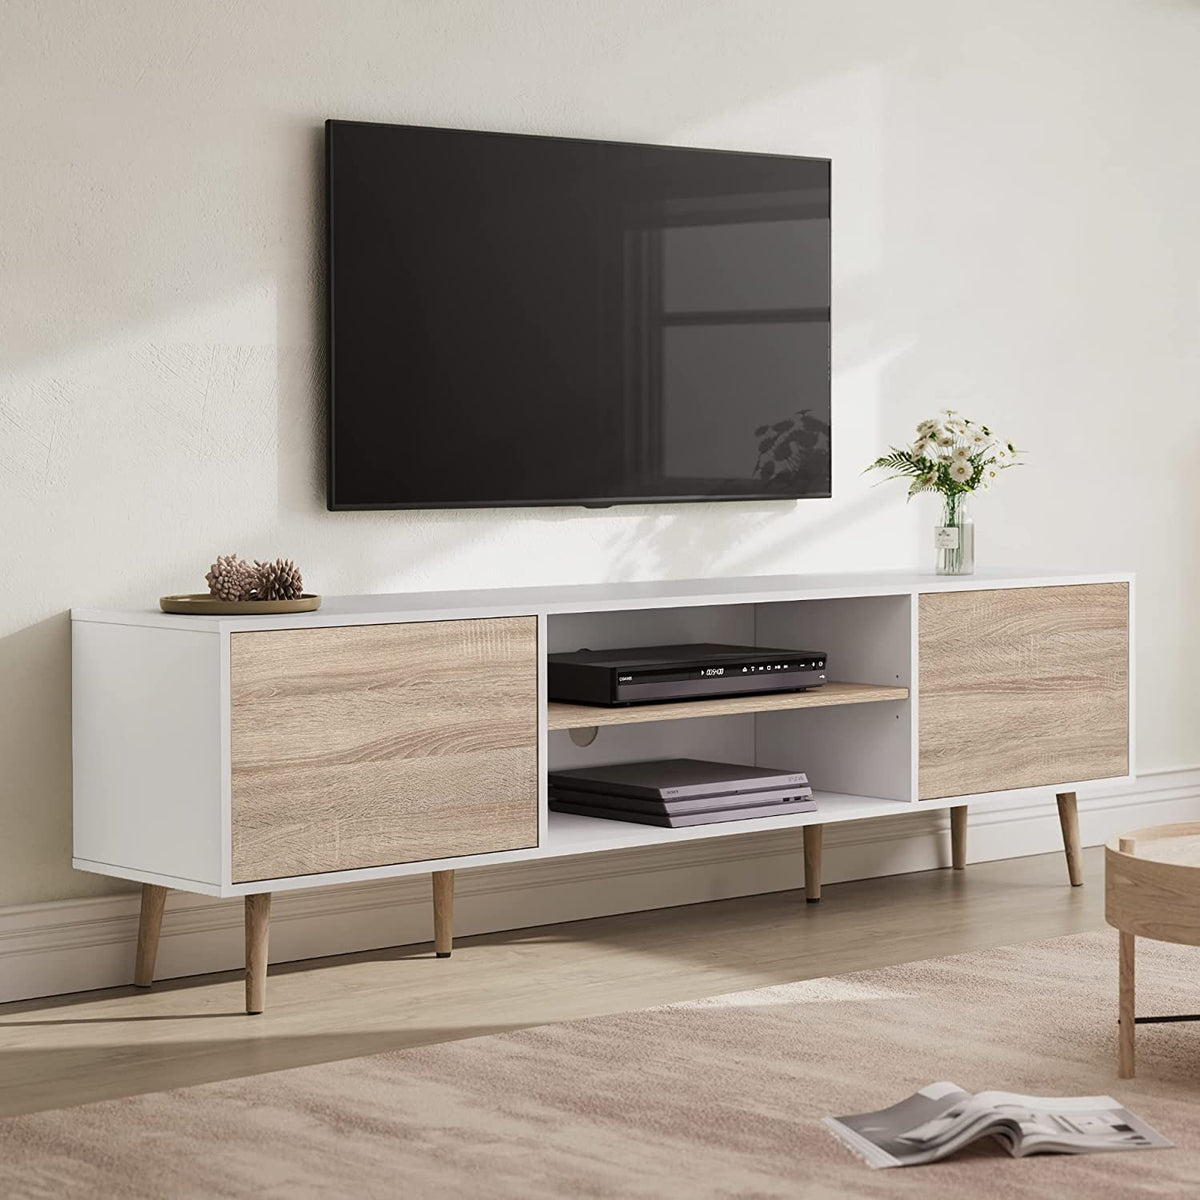 440 Solid Wood TV Unit - Mid-Century Modern Style - 180cm Wide TV Stand &  Media Cabinet - Long - Open Storage - Sliding Doors - Scandi Style Legs 